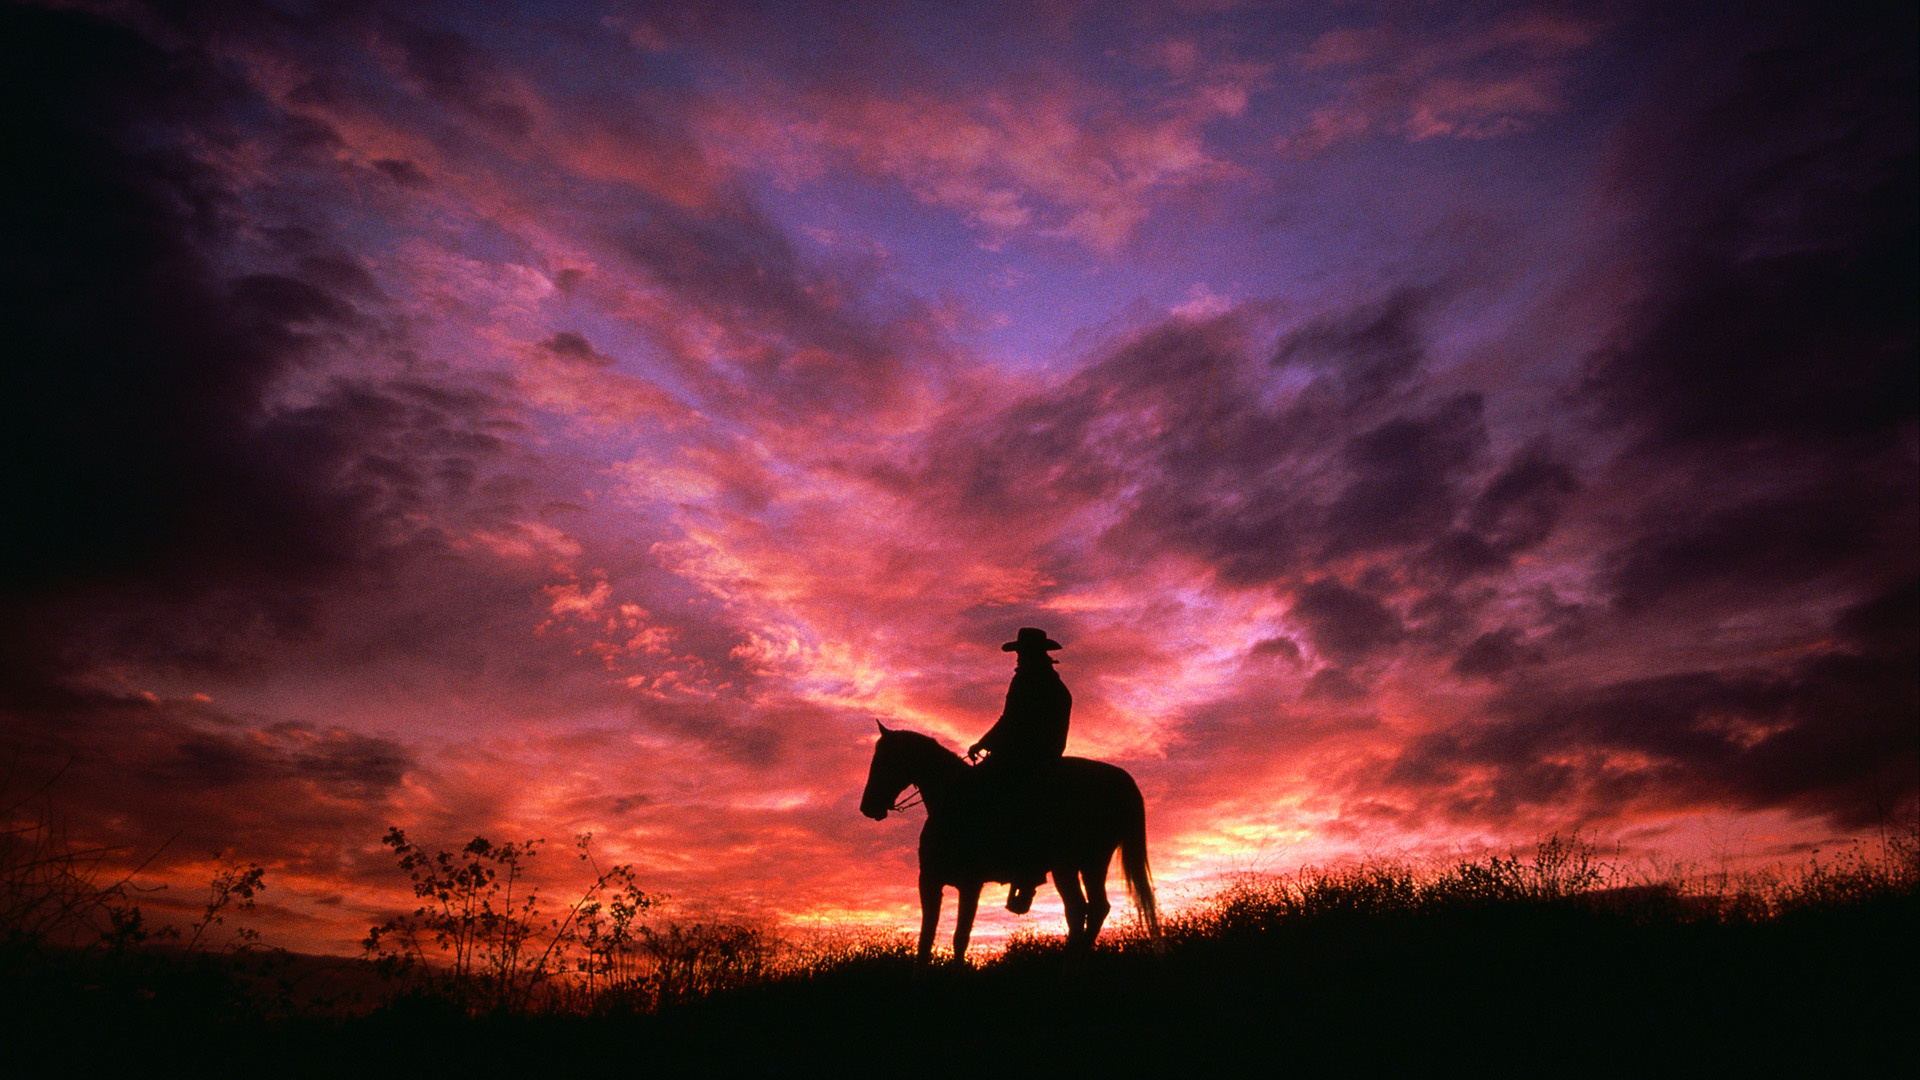 Wallpaper Sky Cowboy Clouds Horse Silhouette Sunset On